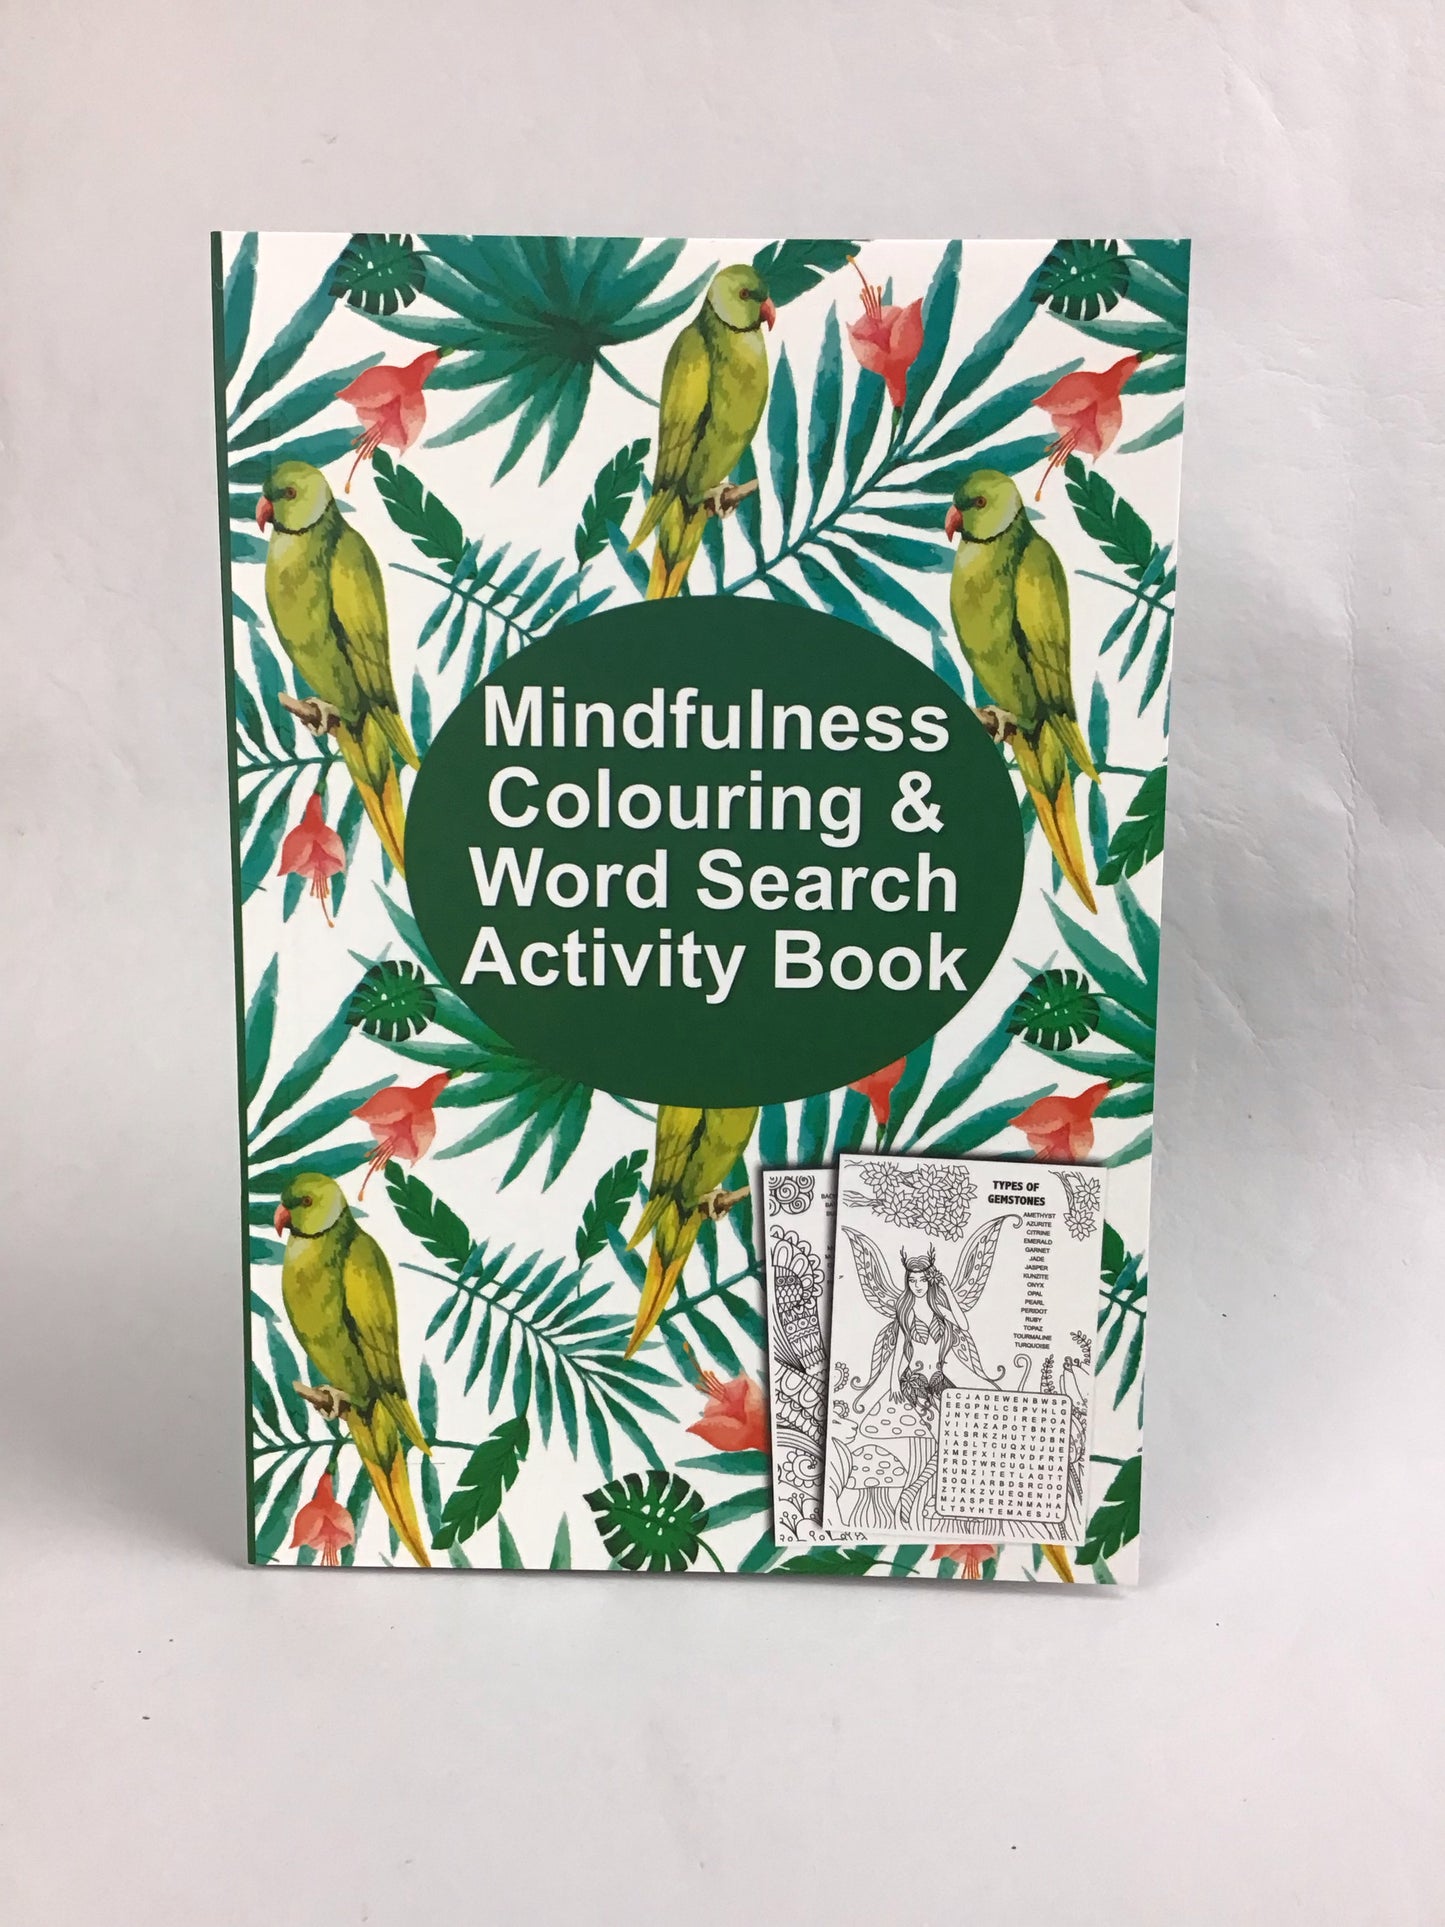 Mindfulness Colouring & Word Search Activity Book - #3